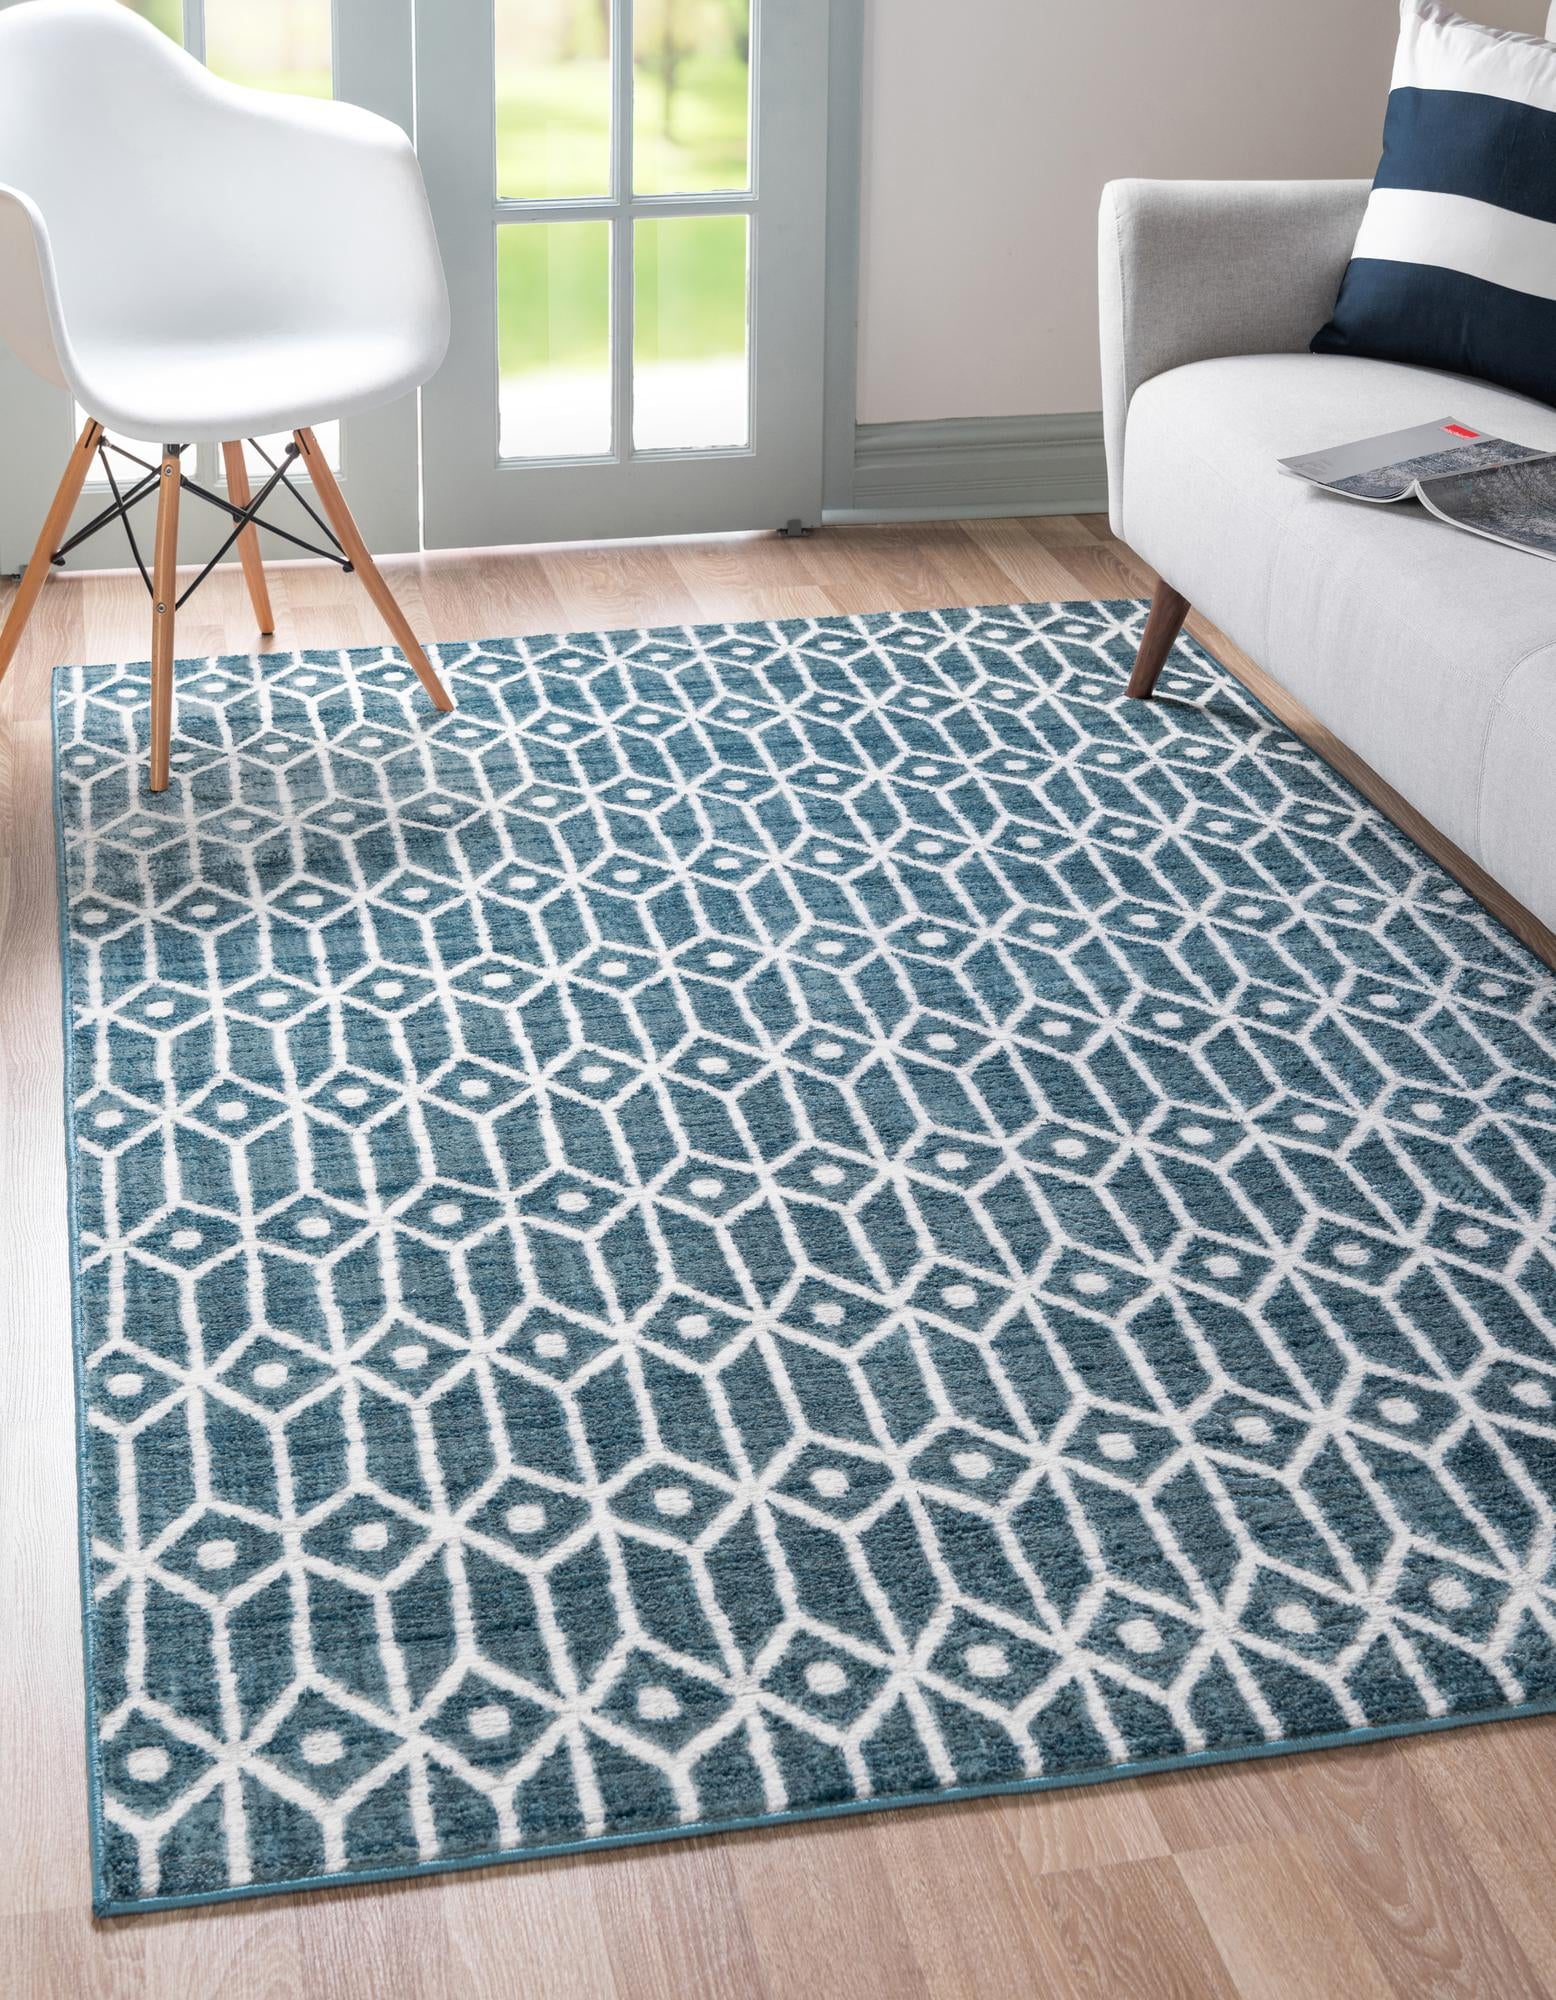 Rugs.com Lattice Trellis Collection Rug 10' x 14' Blue Low-Pile Rug Perfect for Living Rooms Large Dining Rooms Open Floorplans 